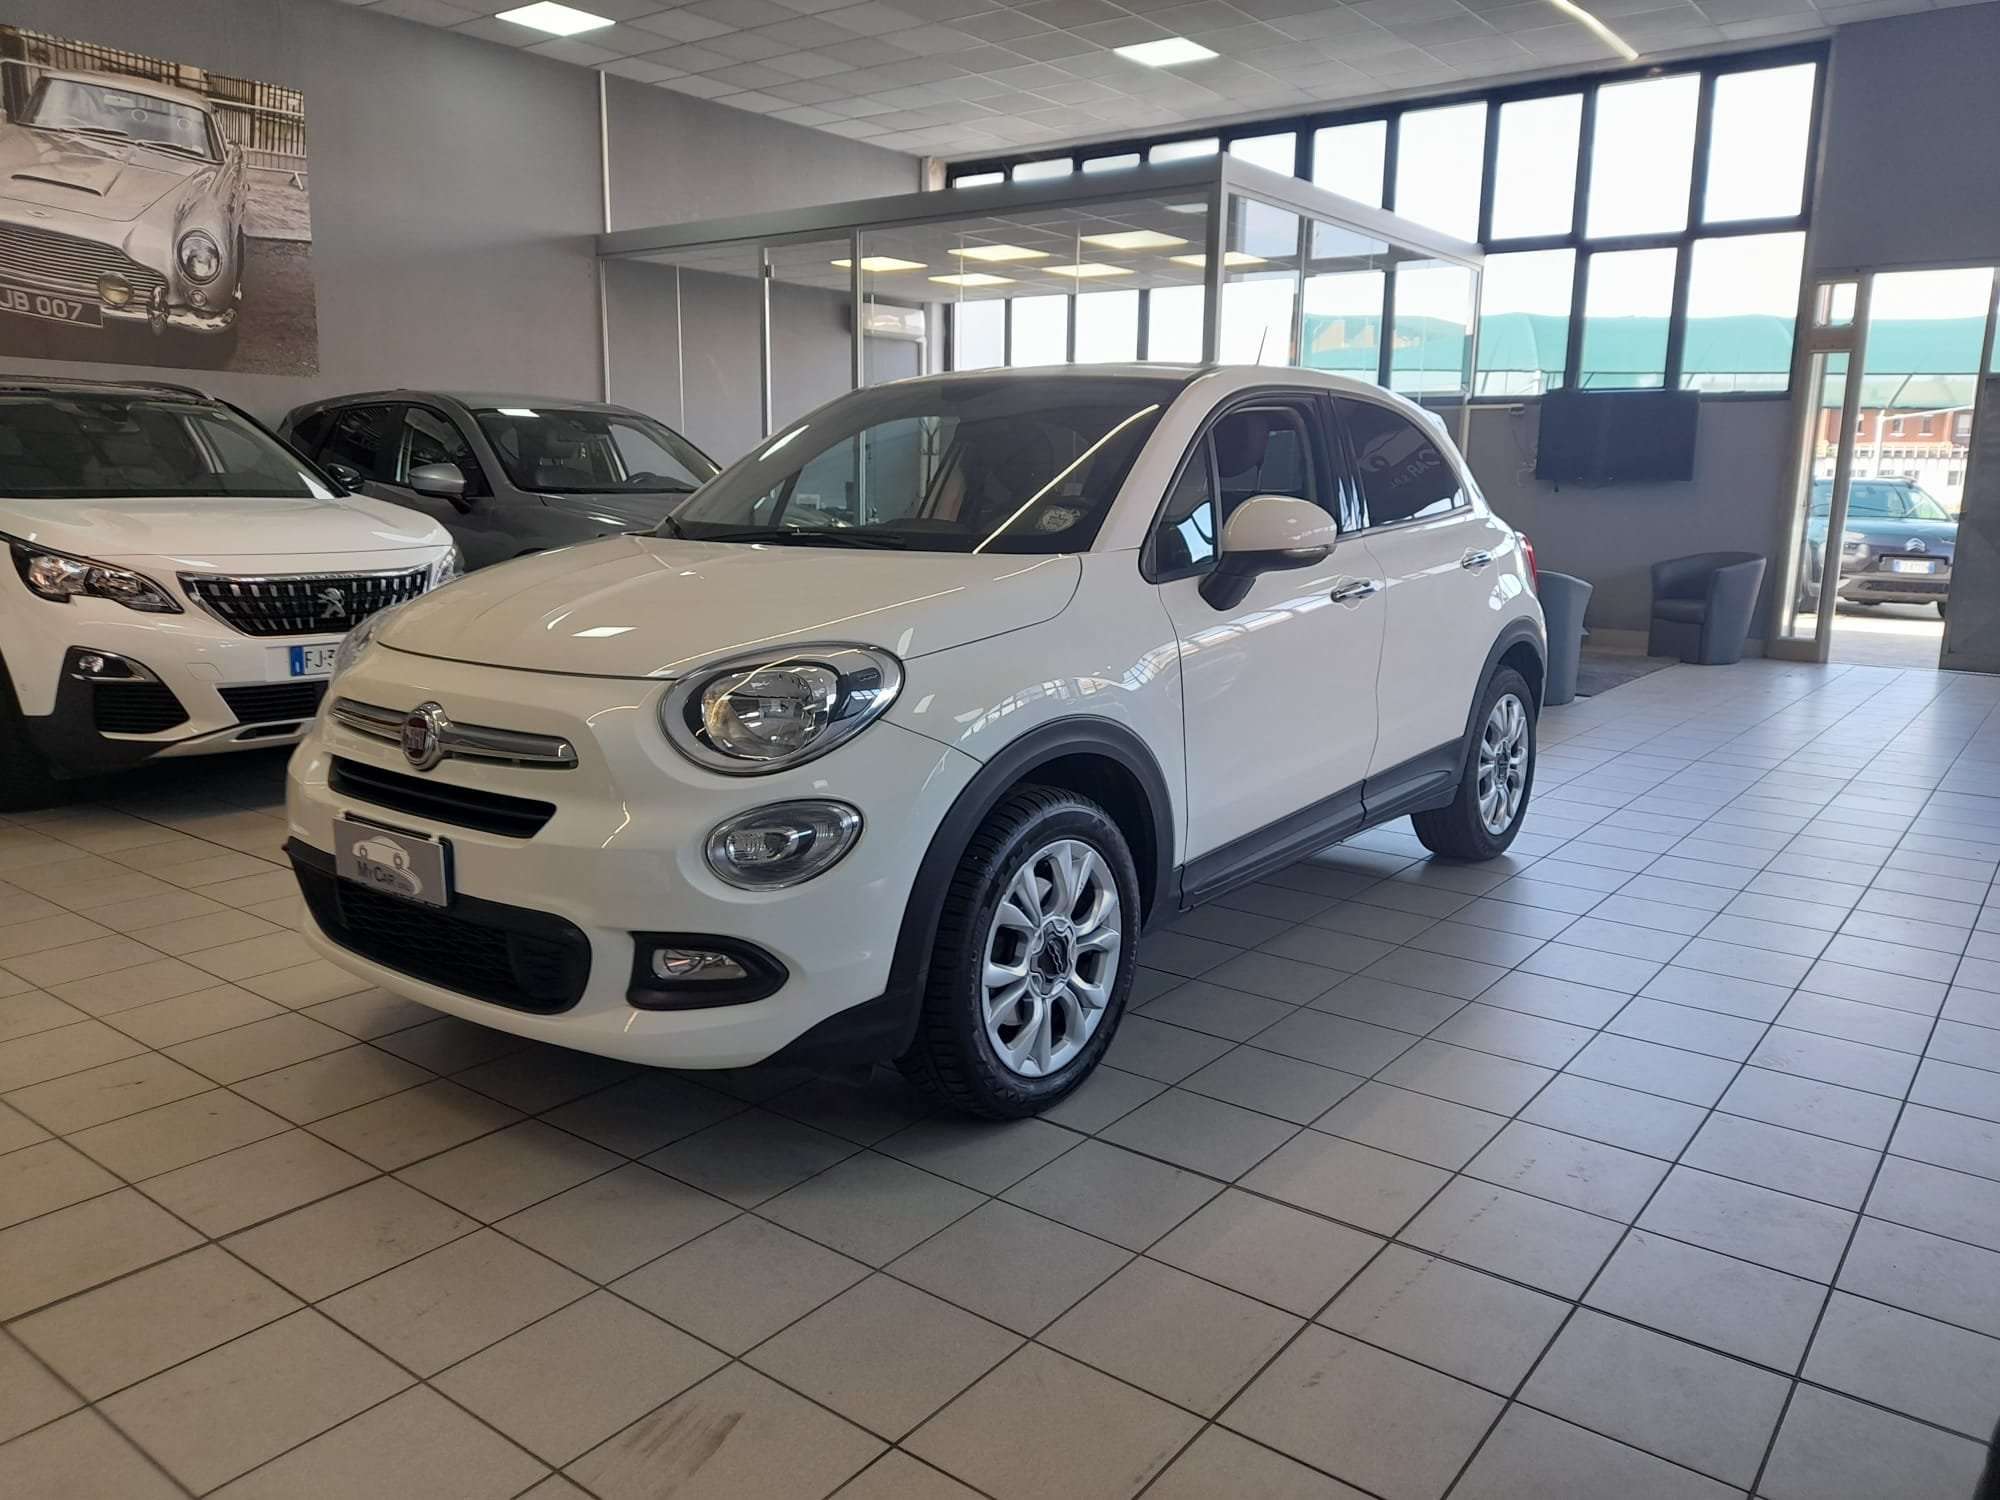 Fiat 500X Station wagon in White used in Pieve Emanuele - Milano - MI for € 10,500.-